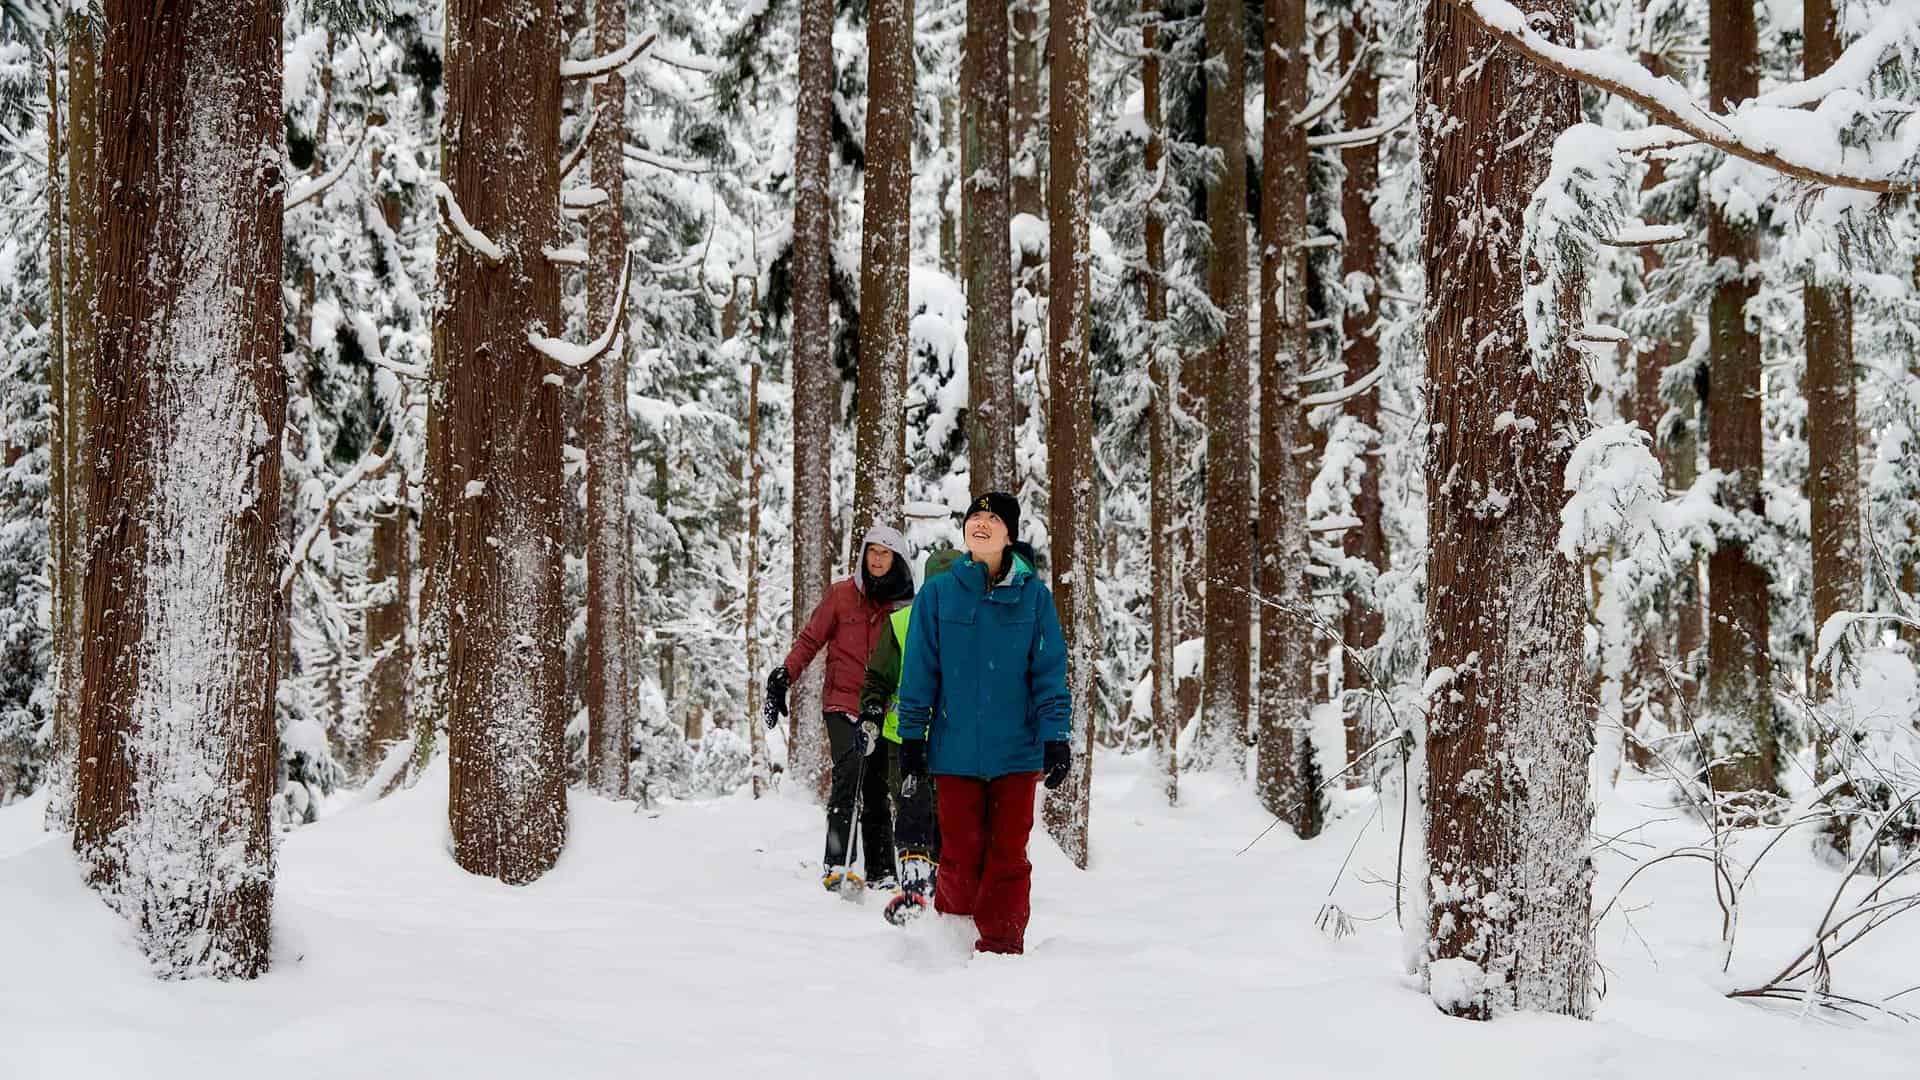 group of people snowshoeing through a serine winter forest